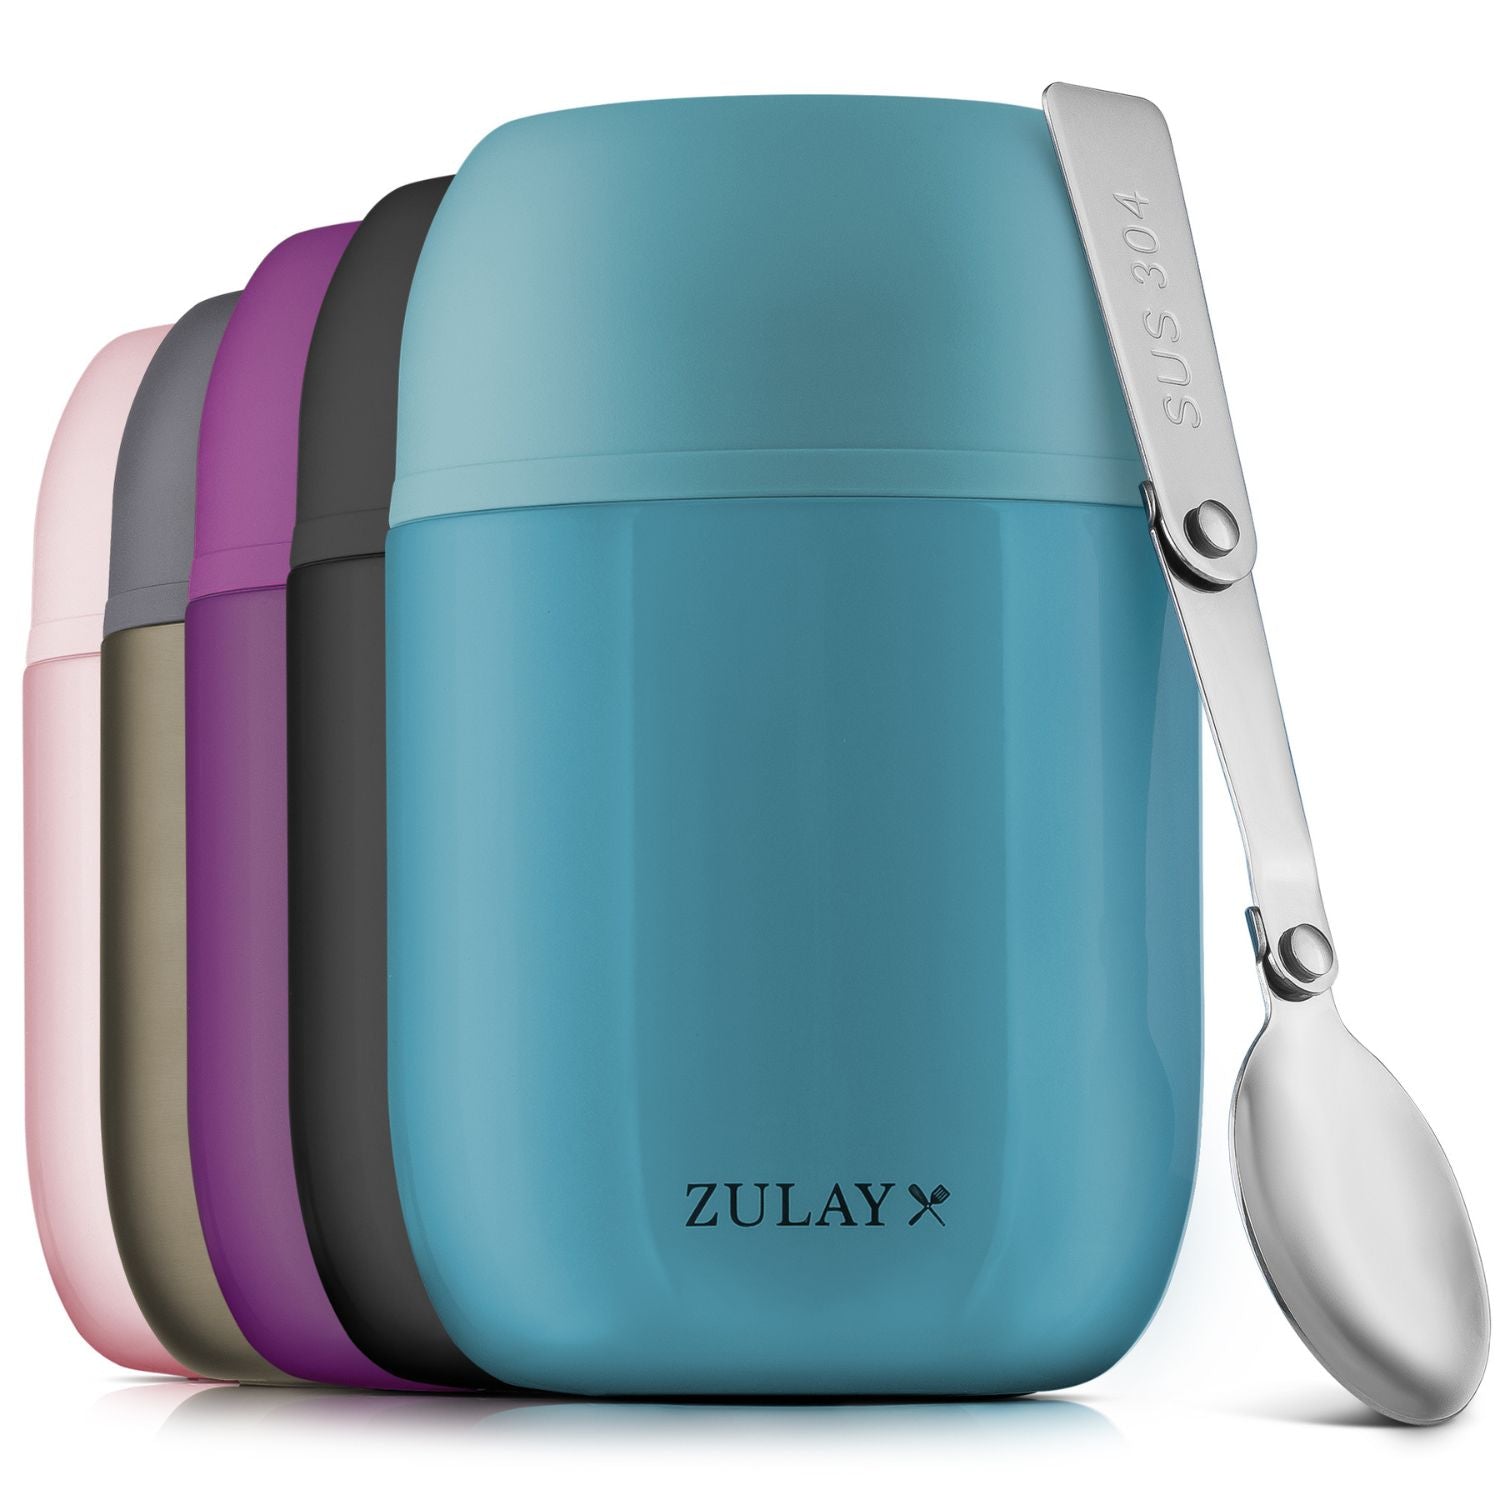 Zulay Vacuum Insulated Lunch Container